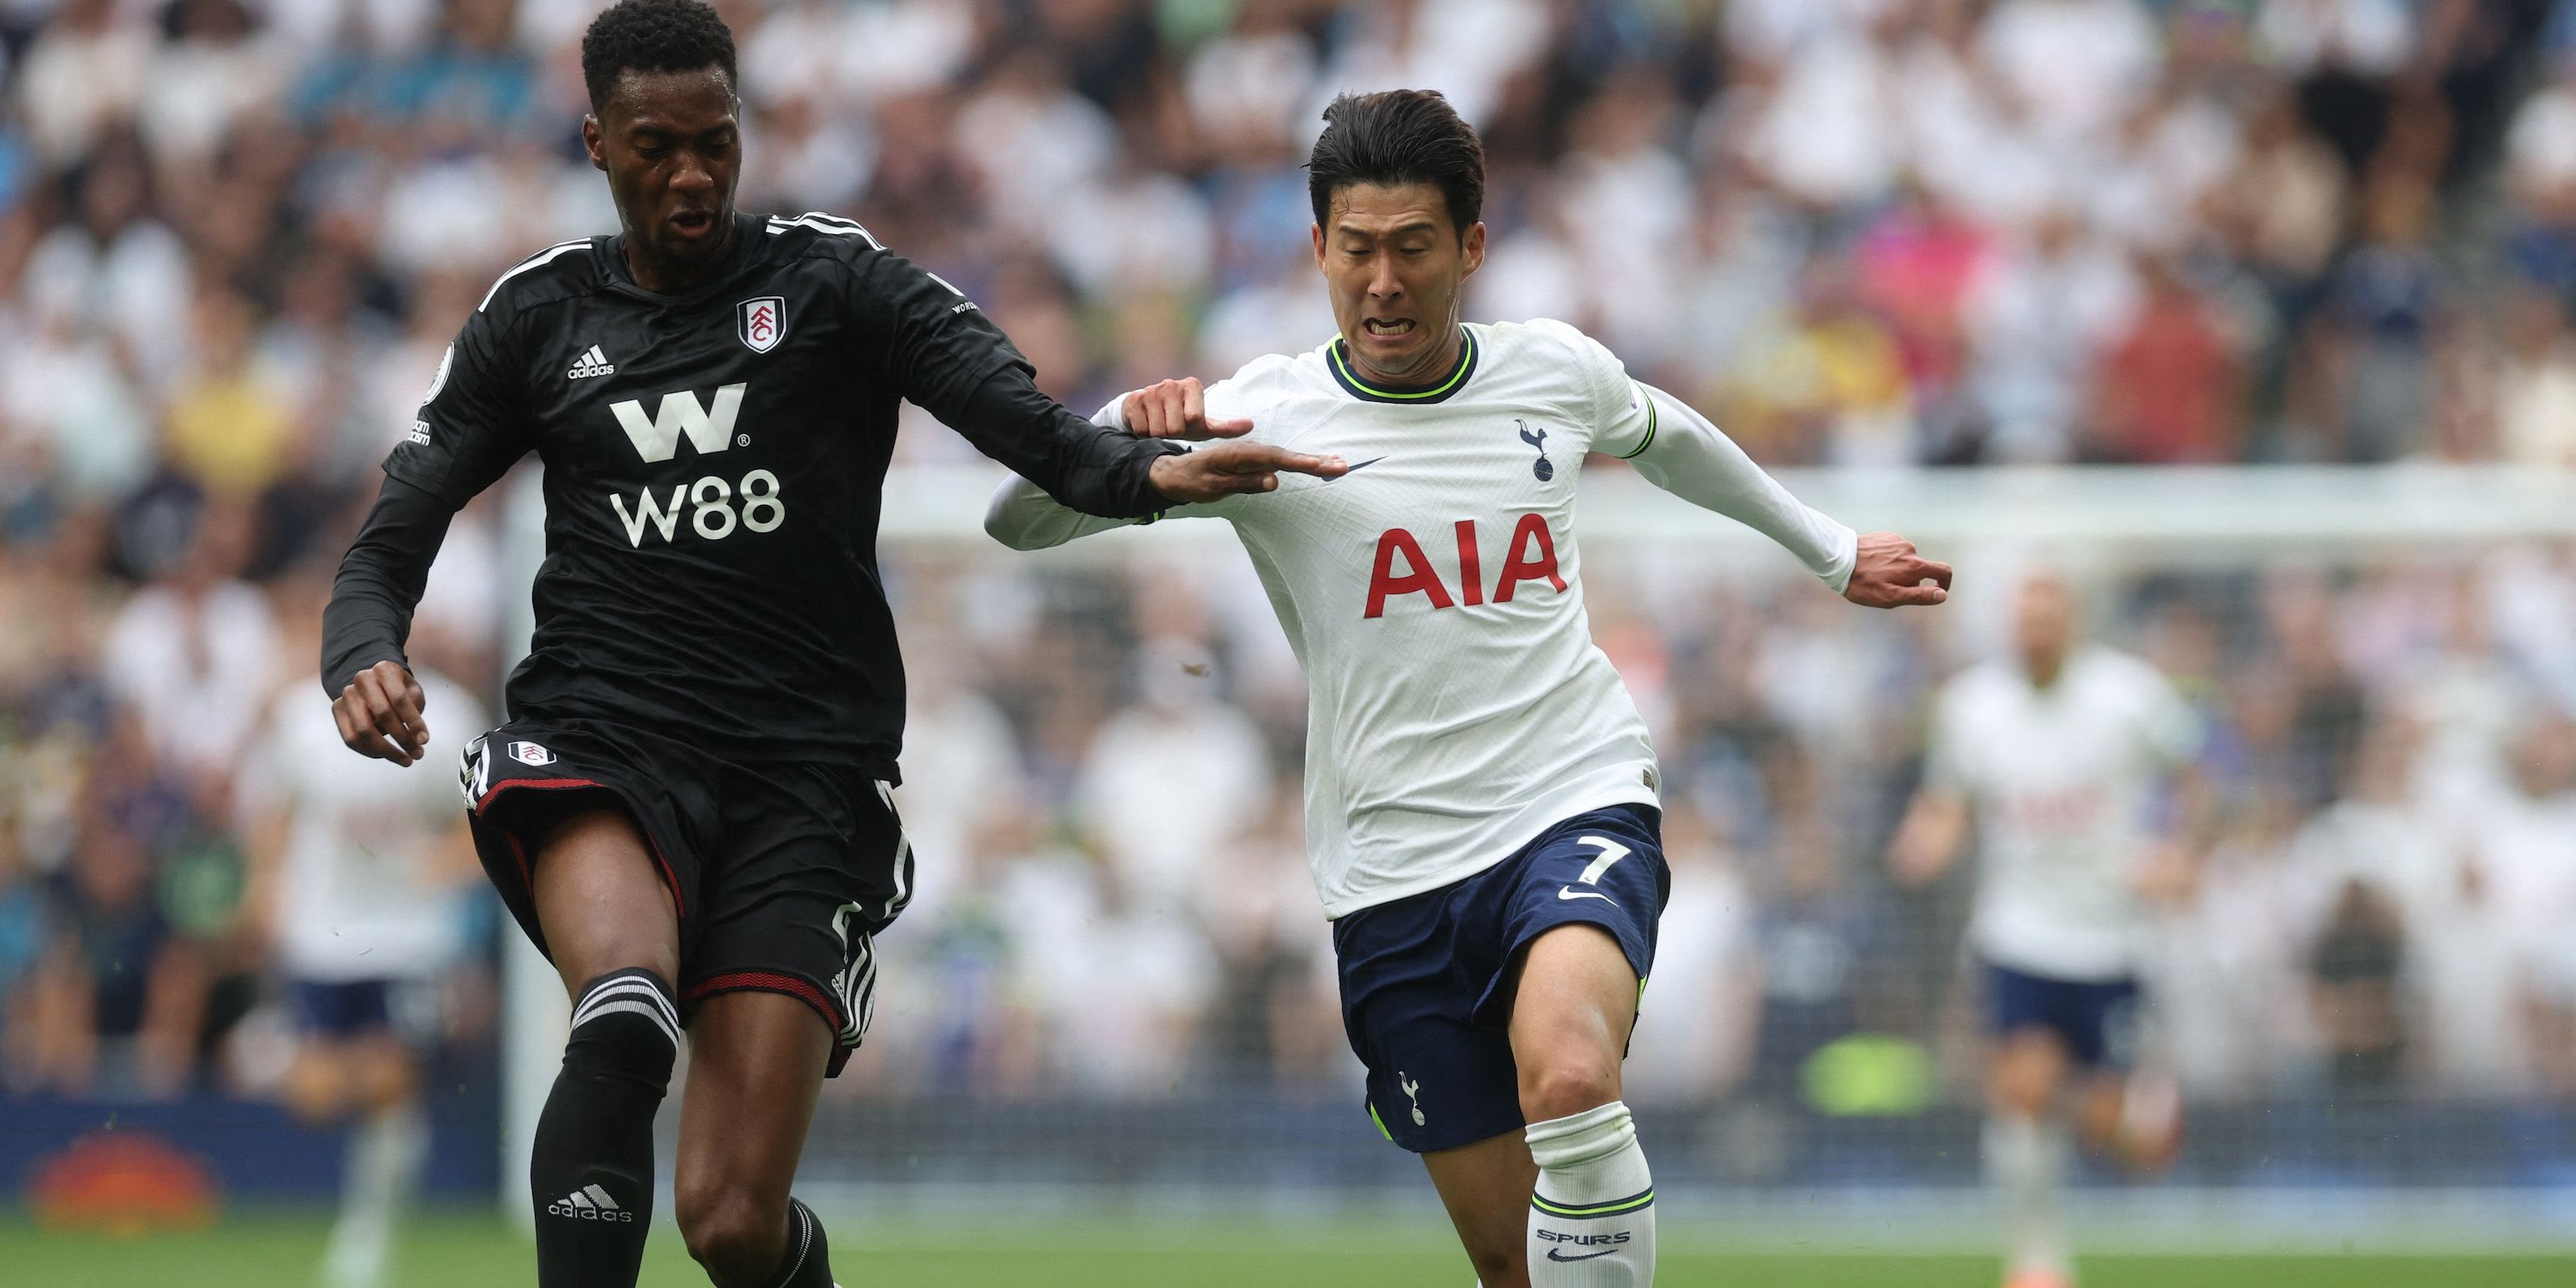 Tottenham Hotspur's Son Heung-min in action with Fulham's Tosin Adarabioyo